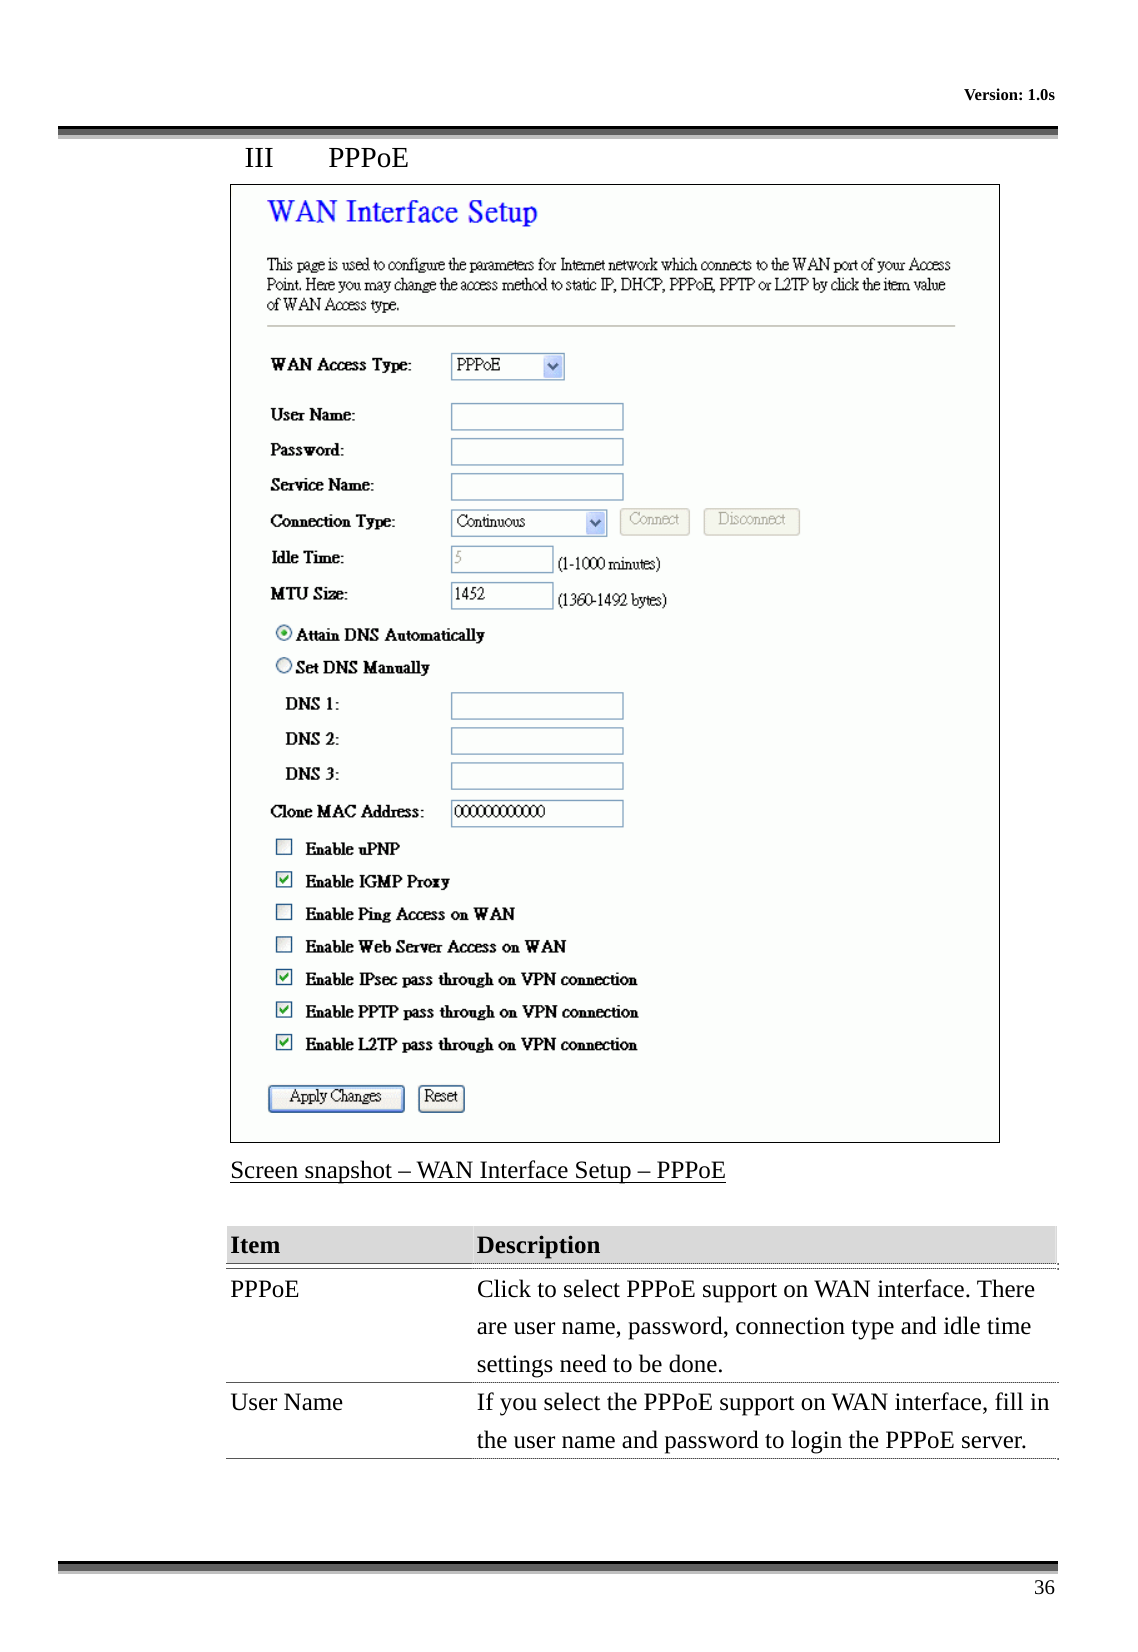     Version: 1.0s      36 III  PPPoE  Screen snapshot – WAN Interface Setup – PPPoE  Item  Description   PPPoE  Click to select PPPoE support on WAN interface. There are user name, password, connection type and idle time settings need to be done. User Name  If you select the PPPoE support on WAN interface, fill in the user name and password to login the PPPoE server. 